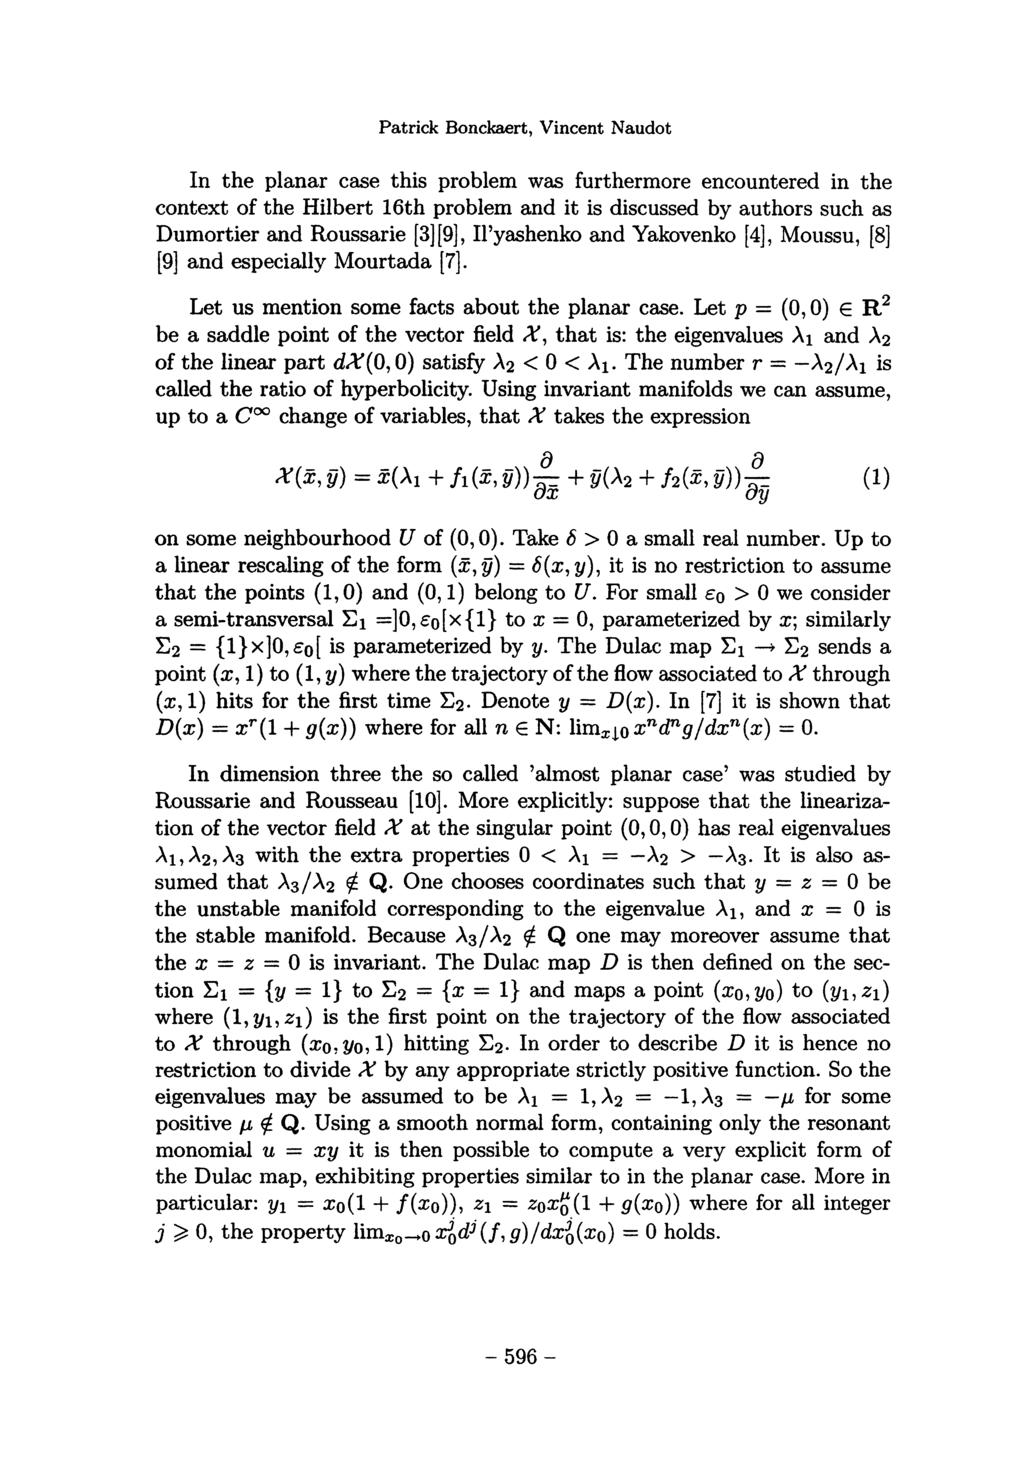 In the planar case this problem was furthermore encountered in the context of the Hilbert 16th problem and it is discussed by authors such as Dumortier and Roussarie ~3~(9), Il yashenko and Yakovenko